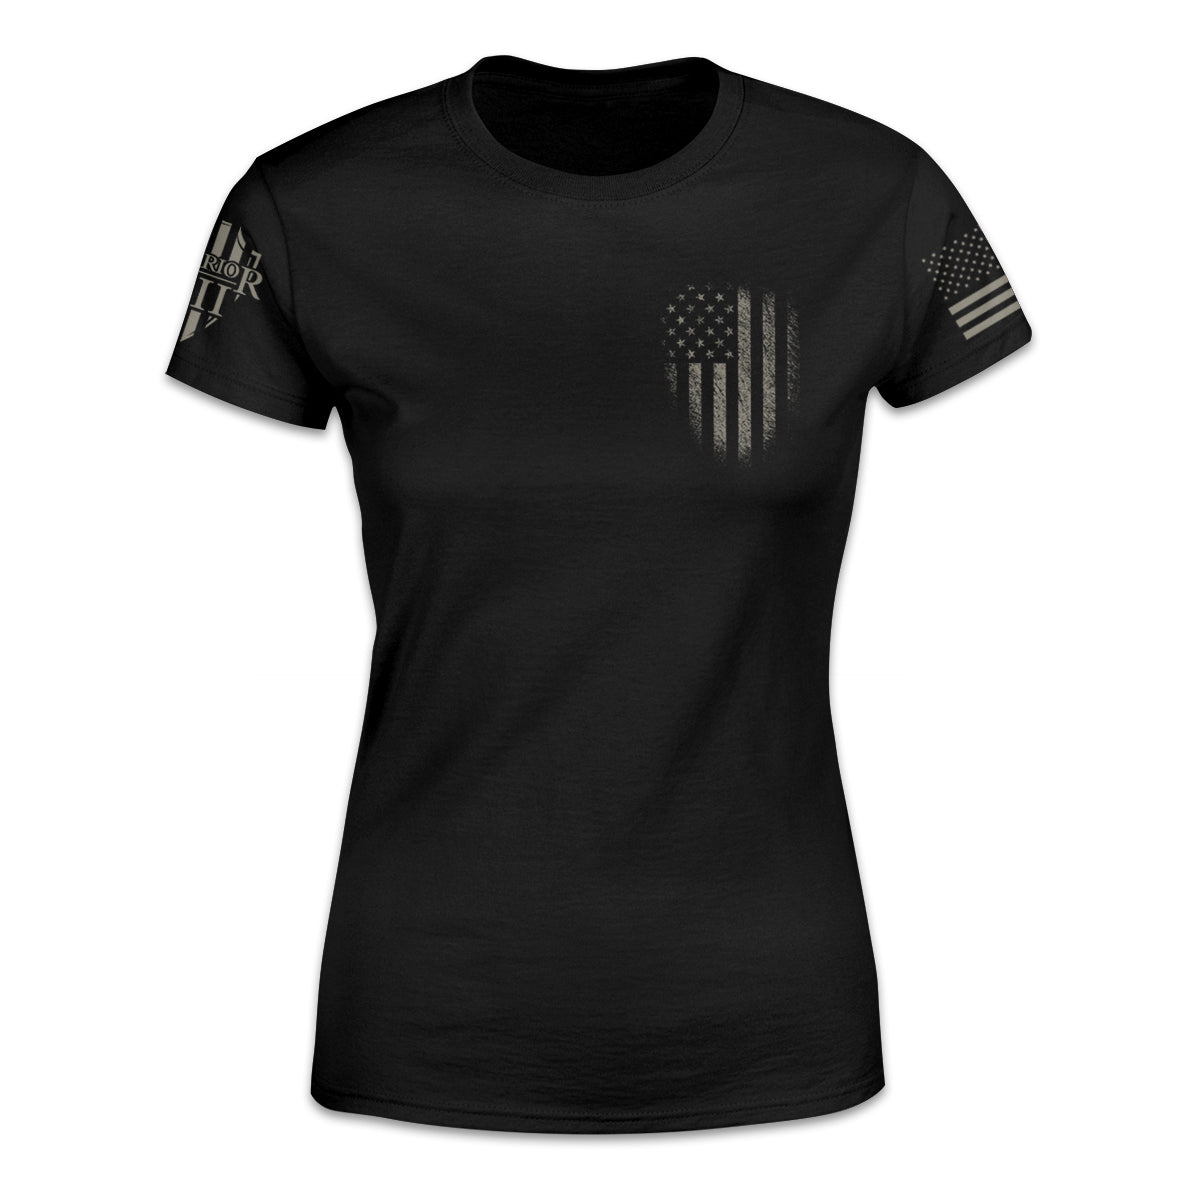 A black women's relaxed fit shirt with a darkened USA flag emblem printed on the front.